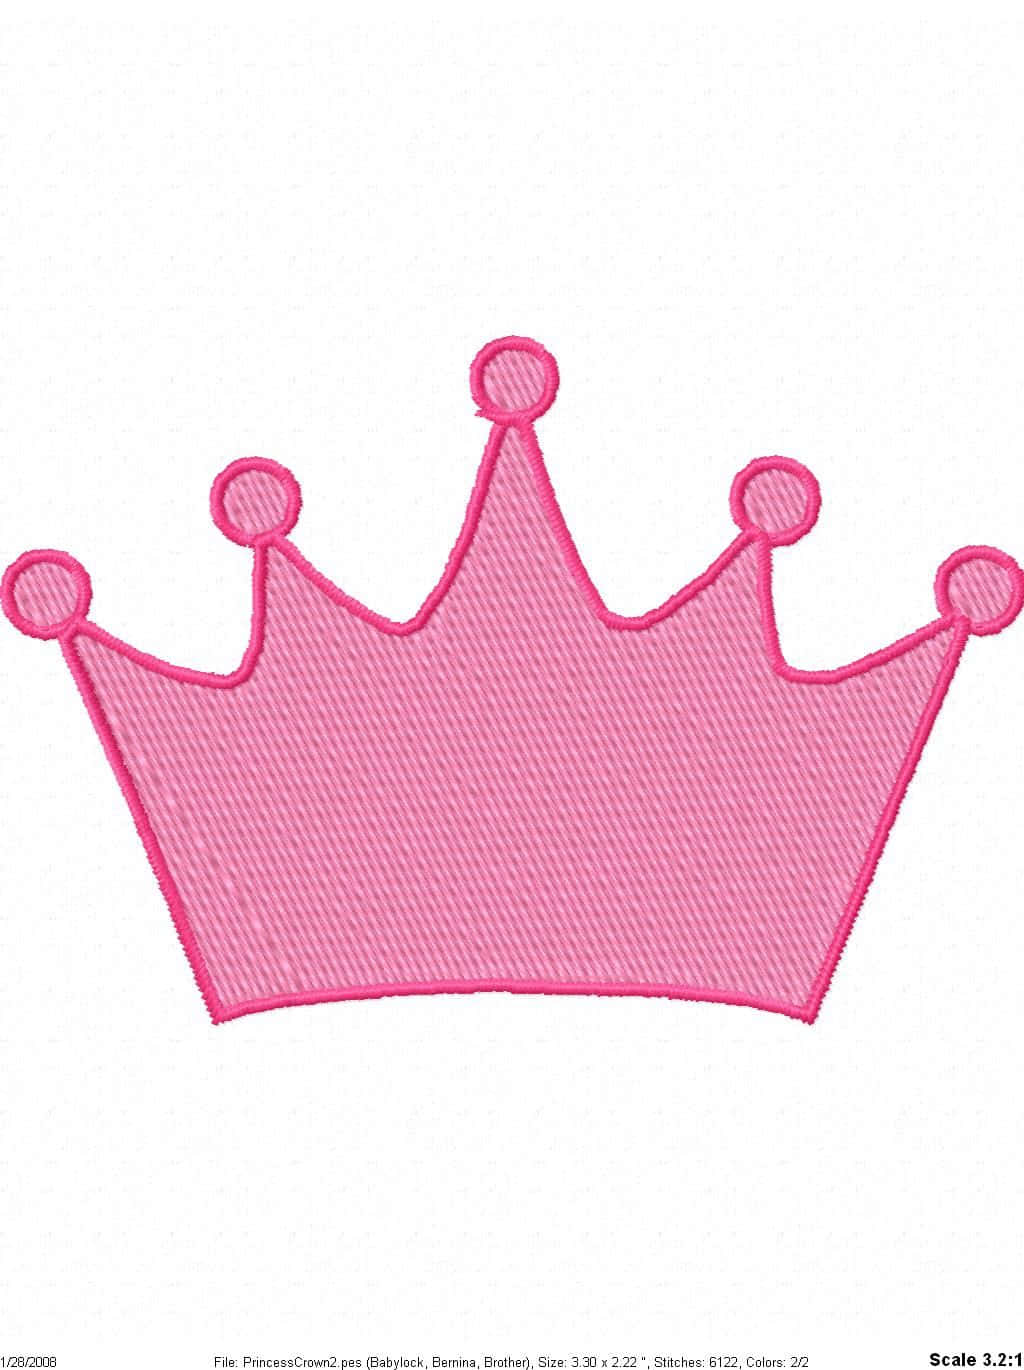 A Pink Crown Embroidery Design Background